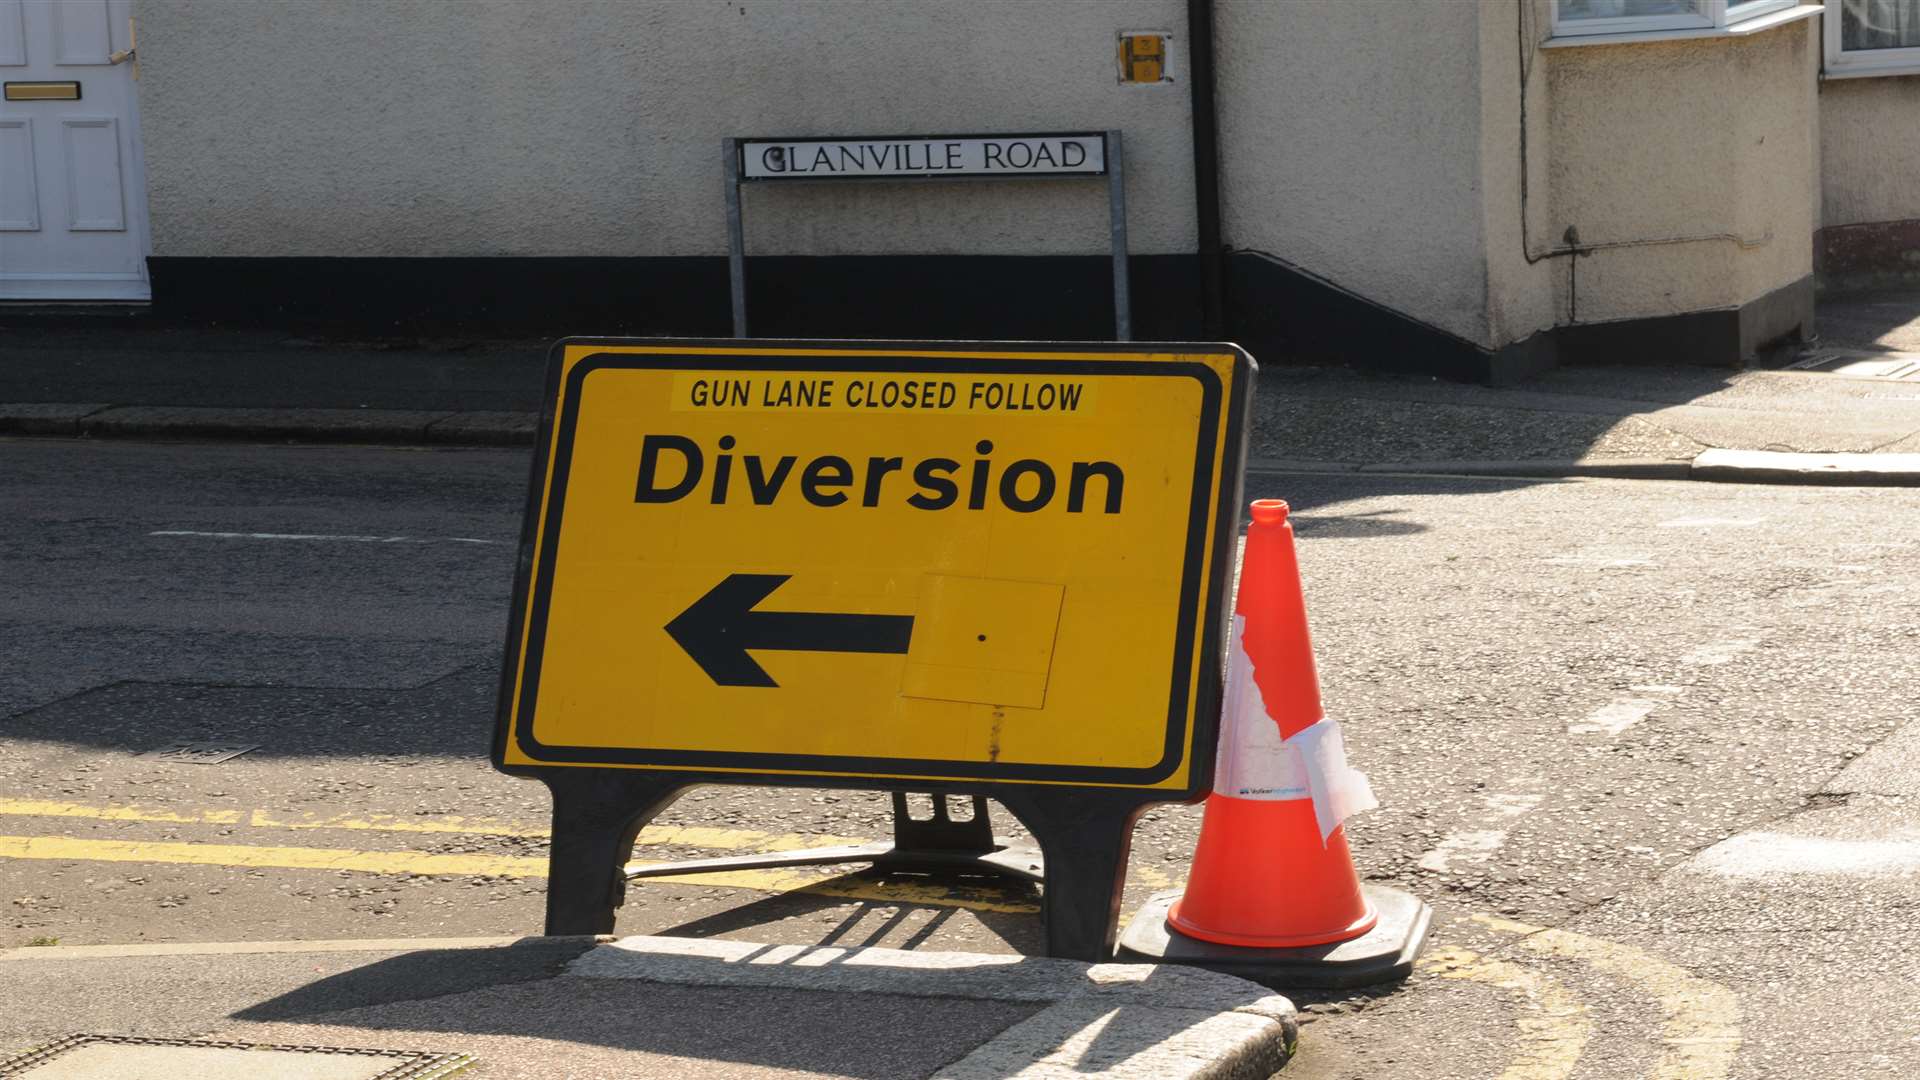 A diversion is in place along Bryant Road and Glanville Road.